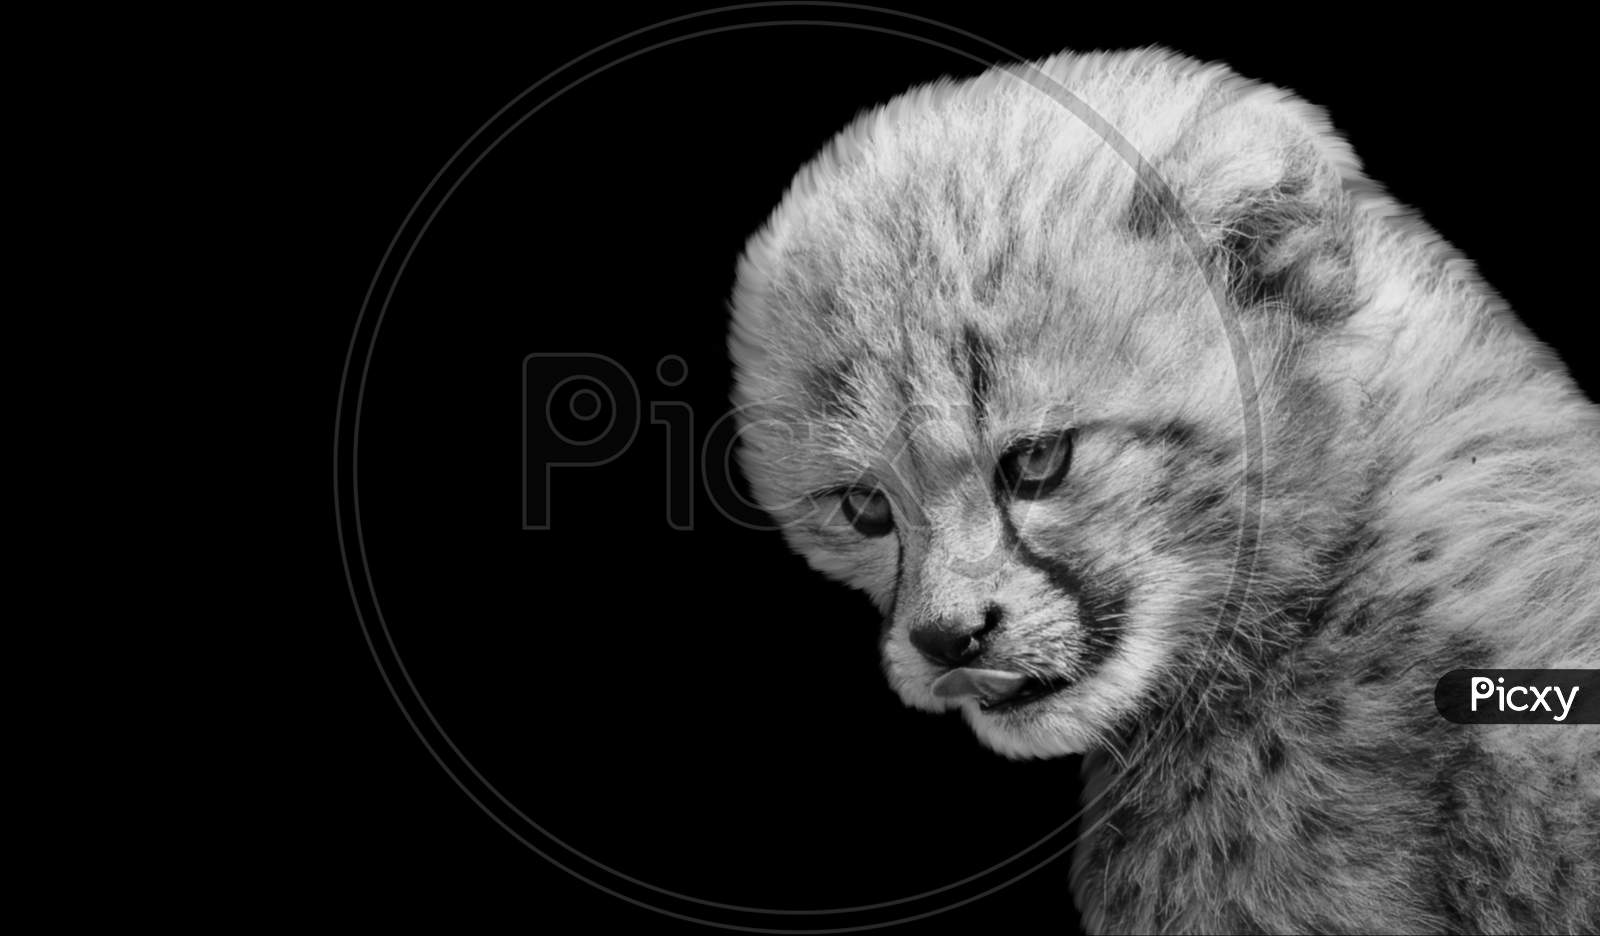 Angry Cheetah Cub Face On The Black Background